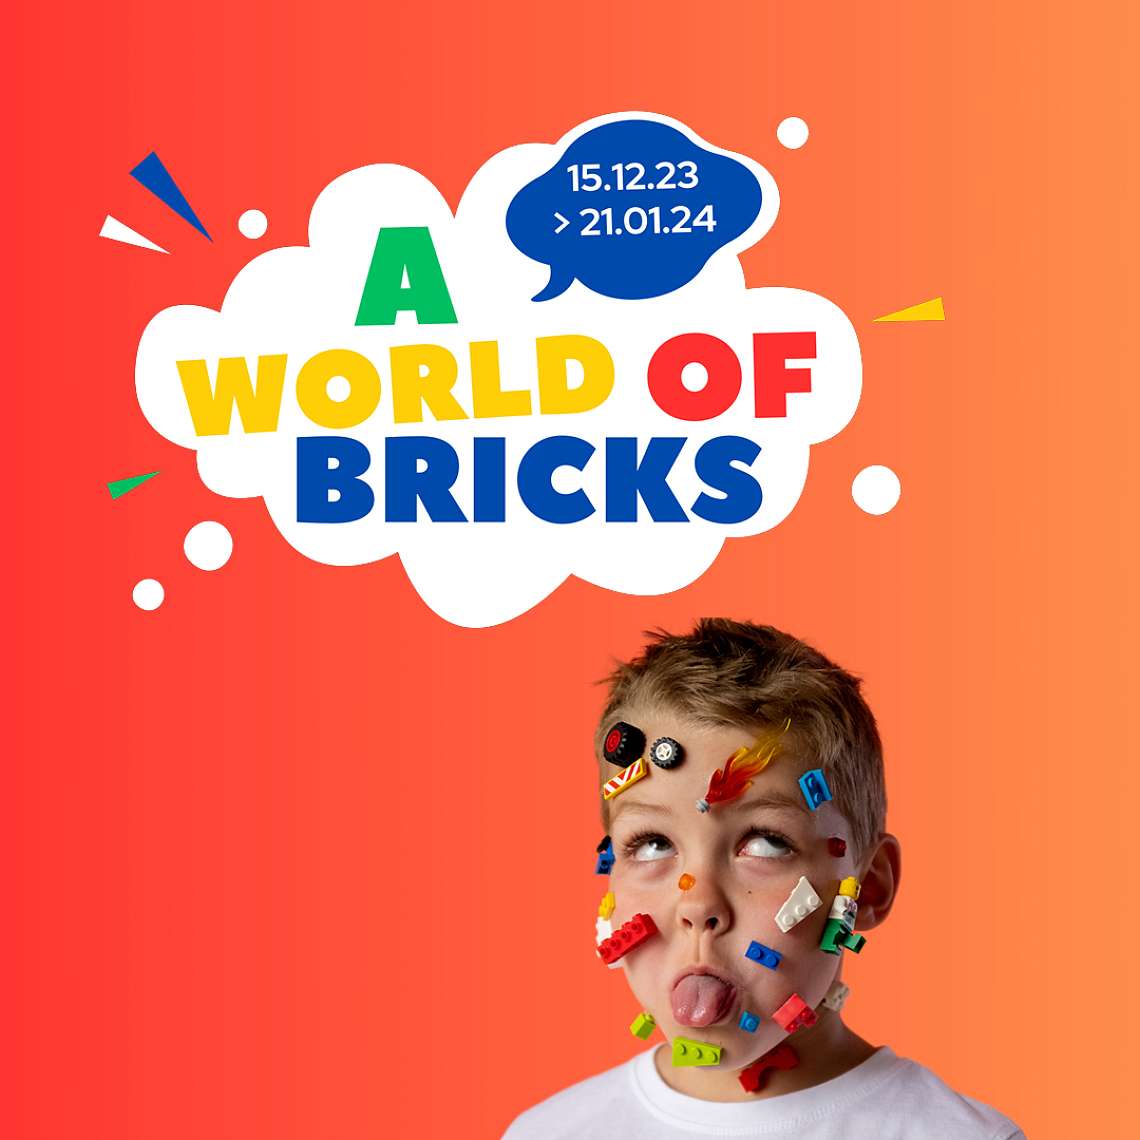 A world of Bricks is coming to Liège